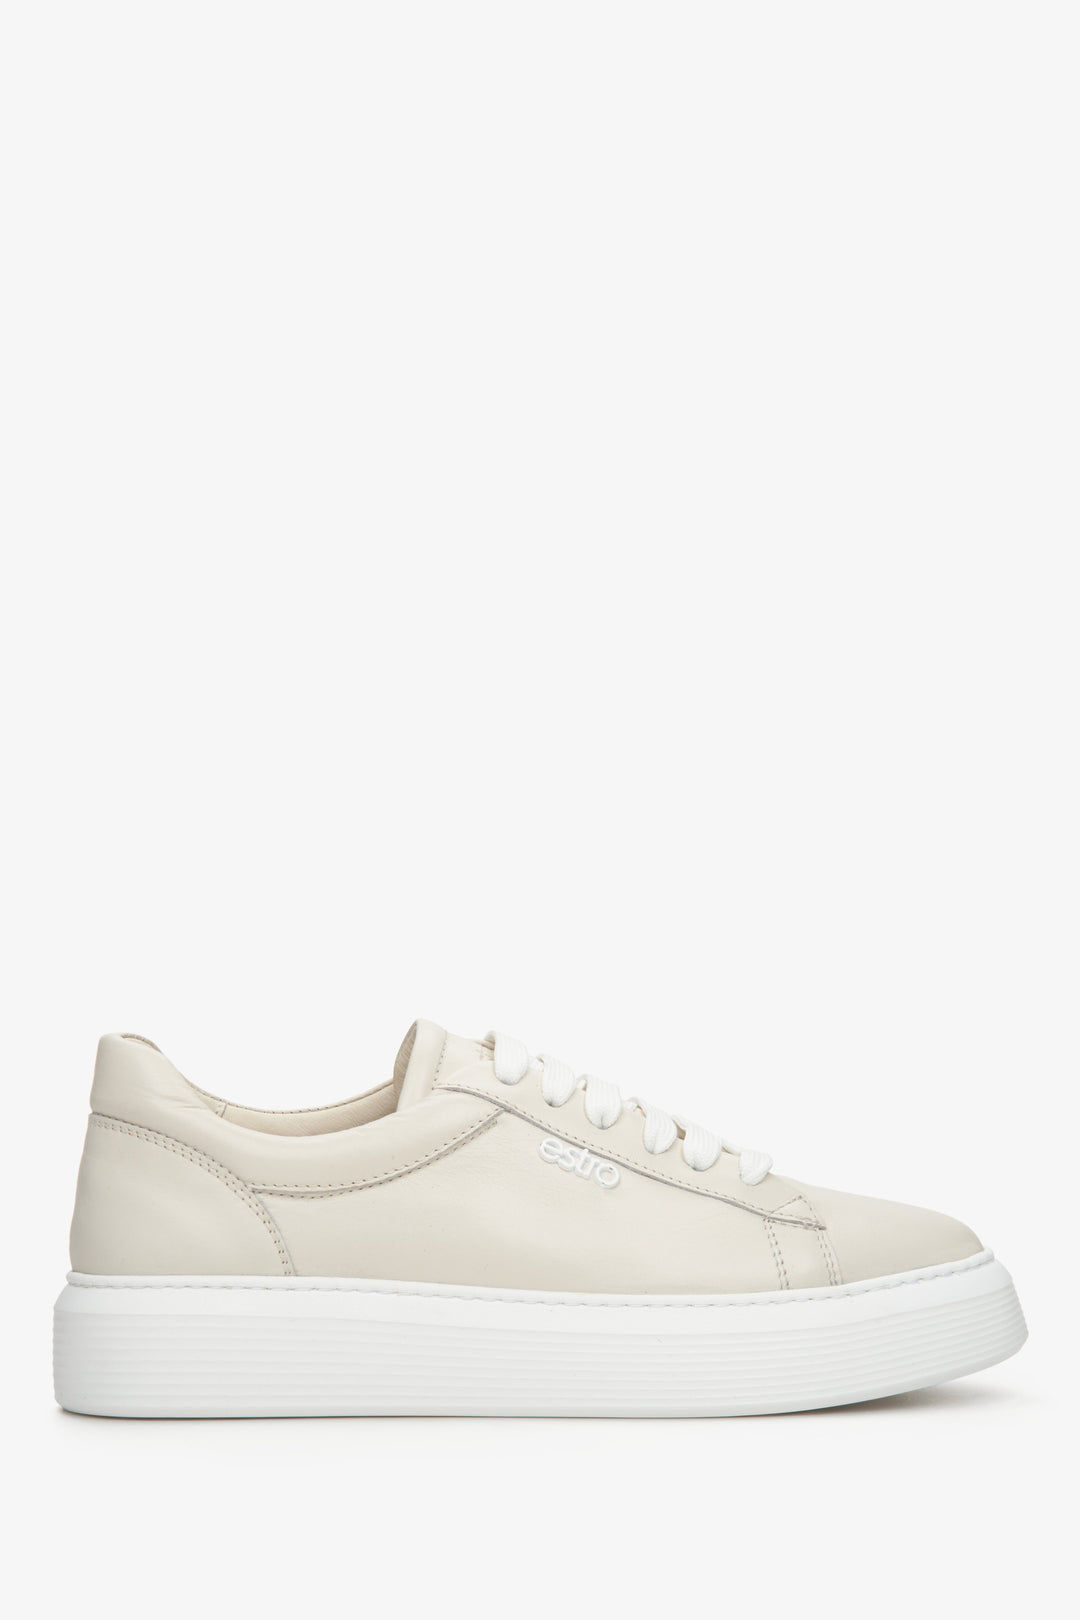 Women's Light Beige Leather Sneakers with Laces Estro ER00112683.